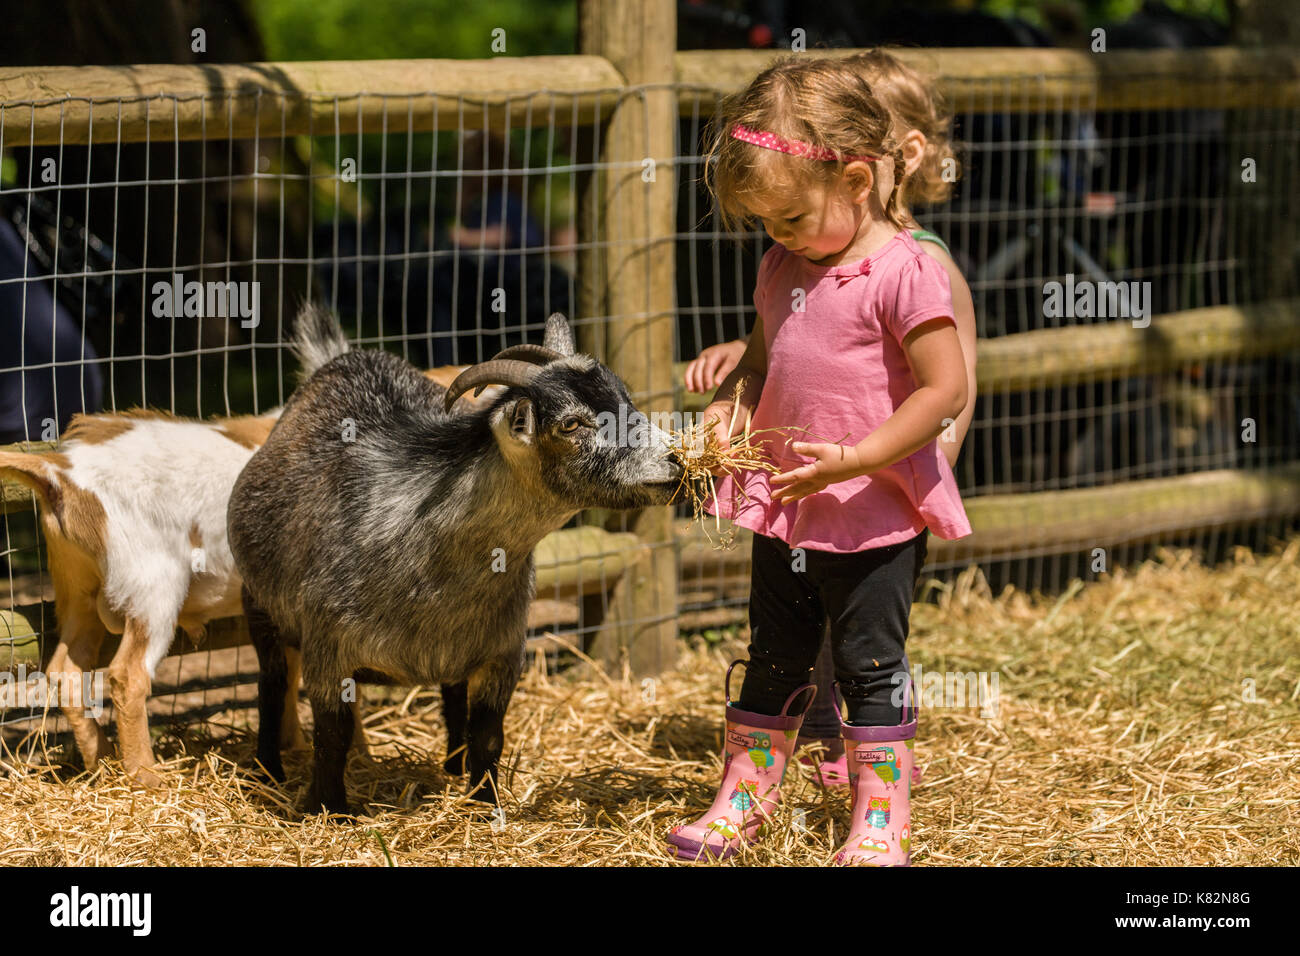 Toddler girl feeding hay to a Nigerian Pygmy goat at Fox Hollow Farm near Issaquah, Washington, USA.  Pygmy goats are not aggressive by nature but are Stock Photo